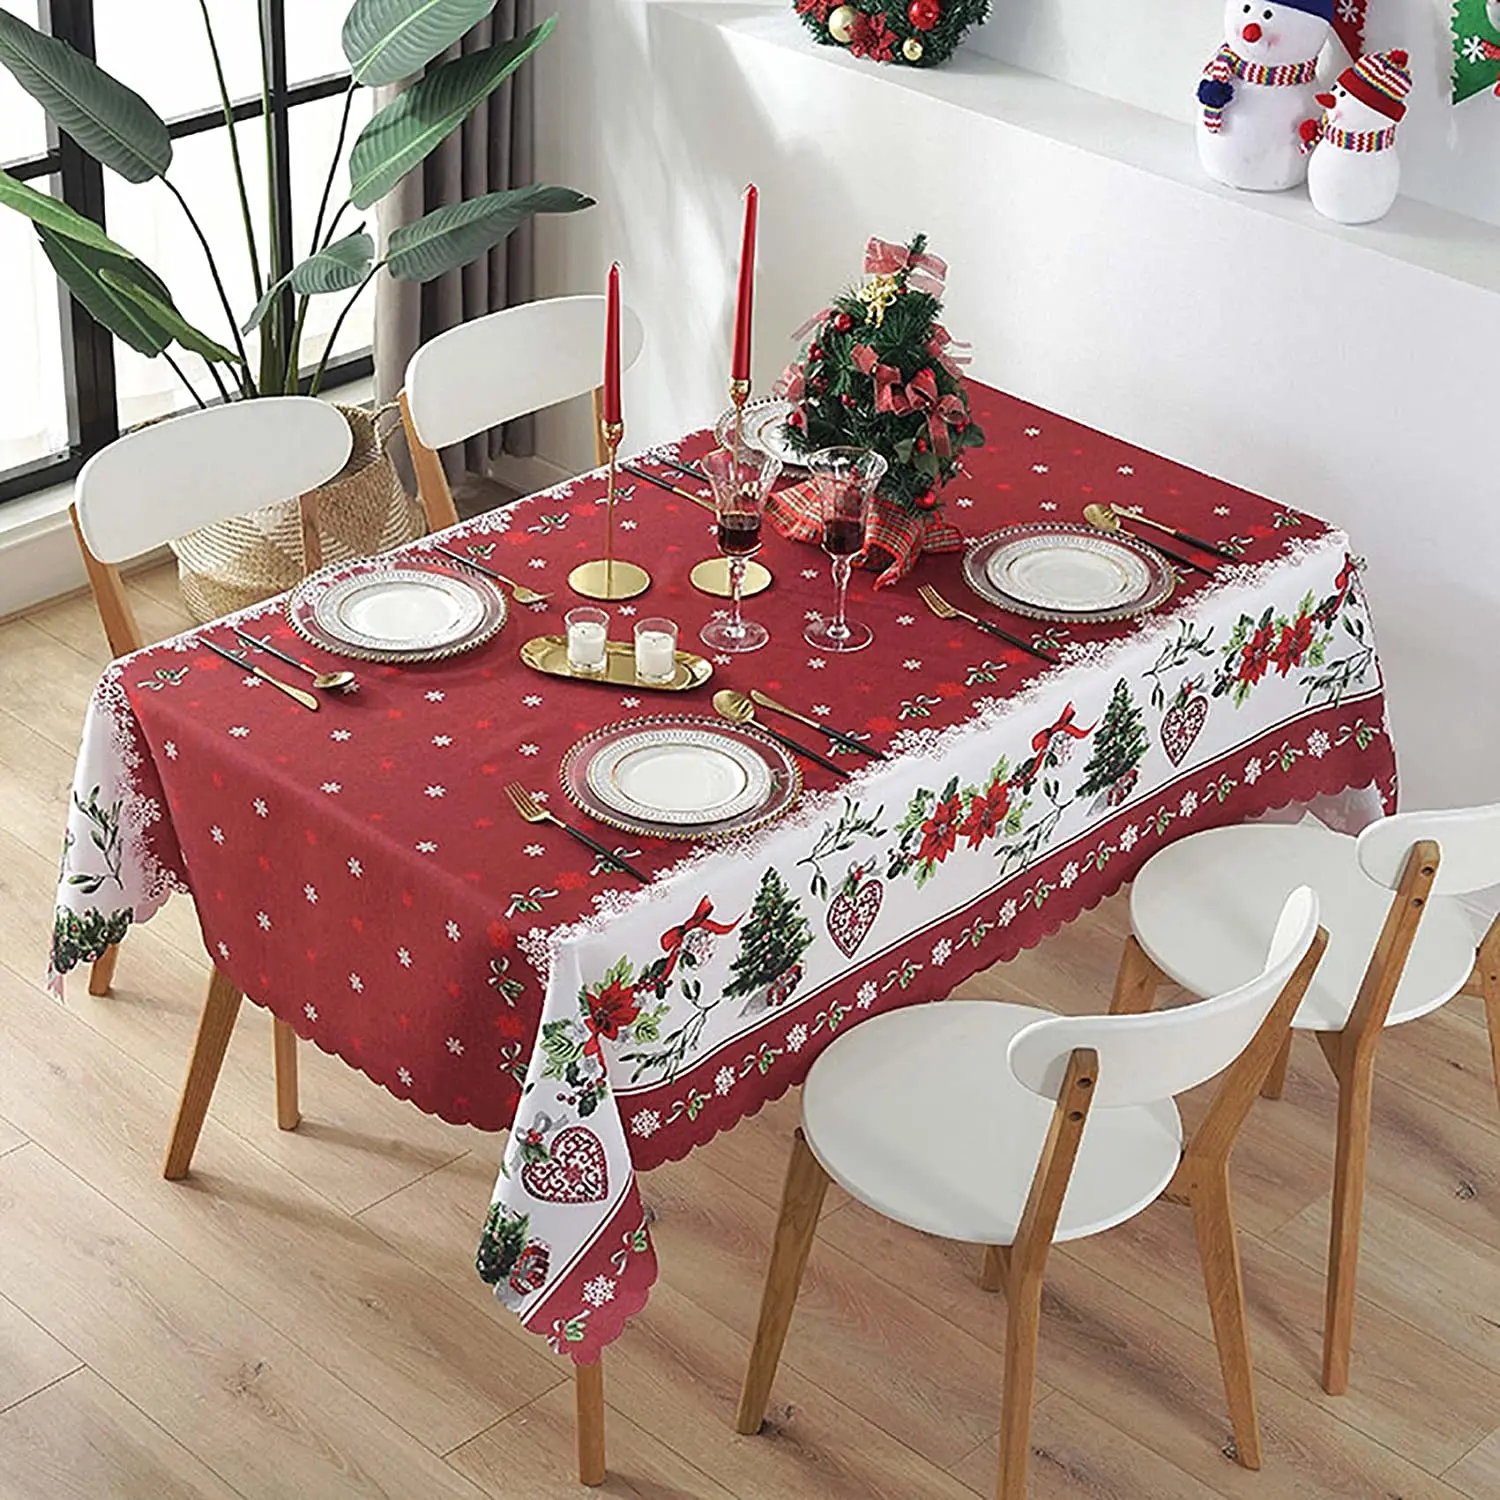 

Christmas Tablecloth,Waterproof Table Cloth, Christmas Tree Rectangle Tables,Table Cove r for Xmas Decor Picnic Party Outdoor